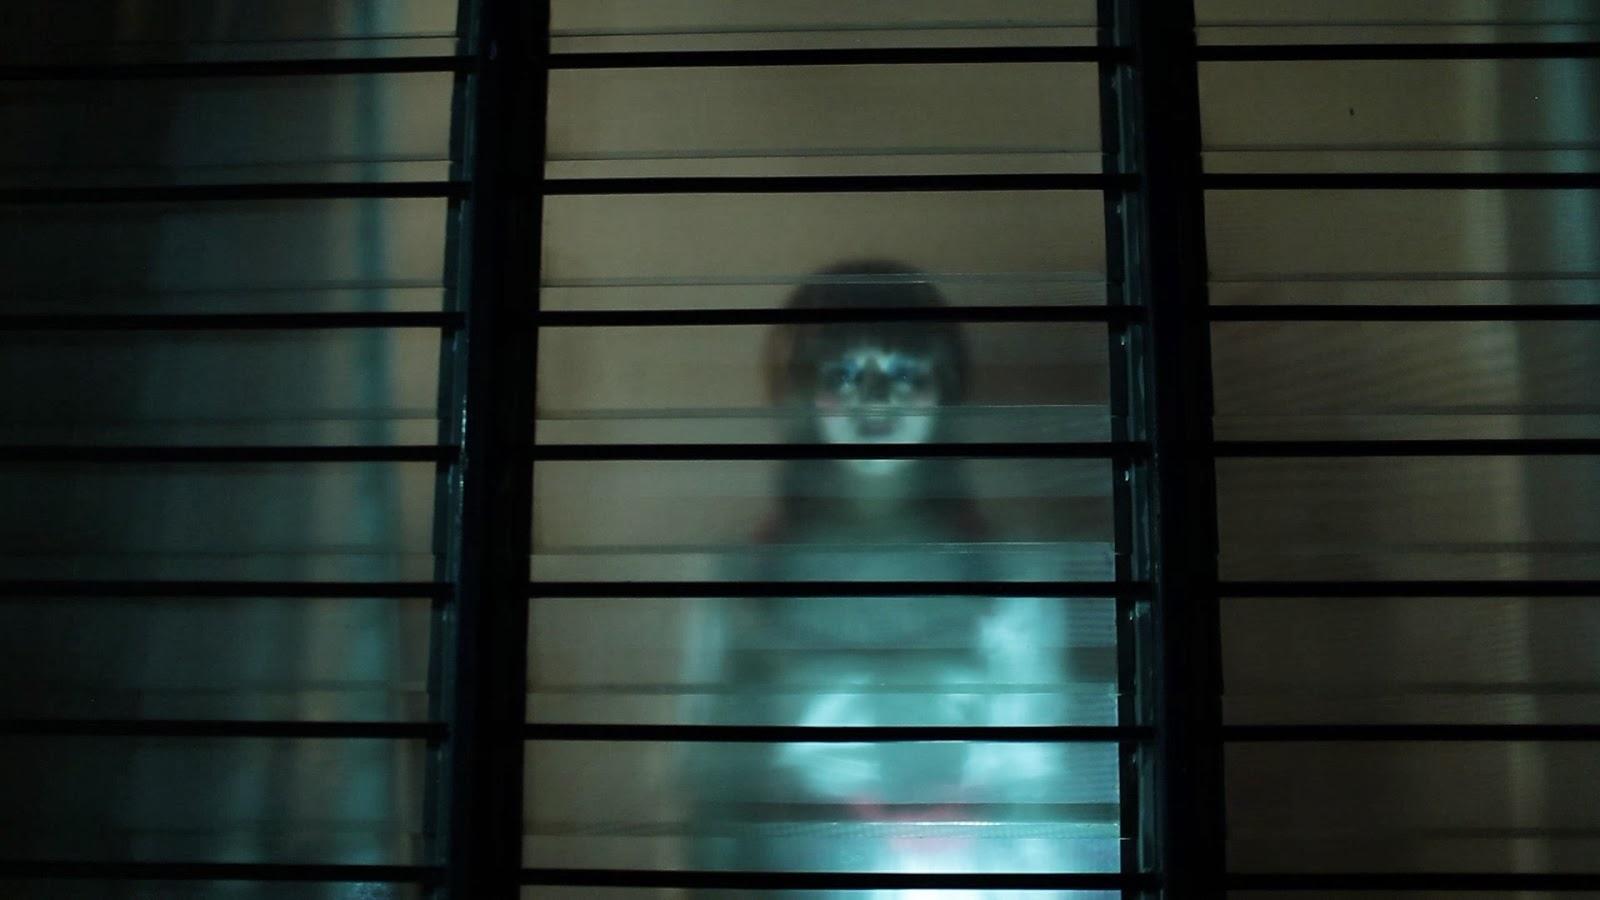 Horror Annabelle Wallpaper Background. Free Download